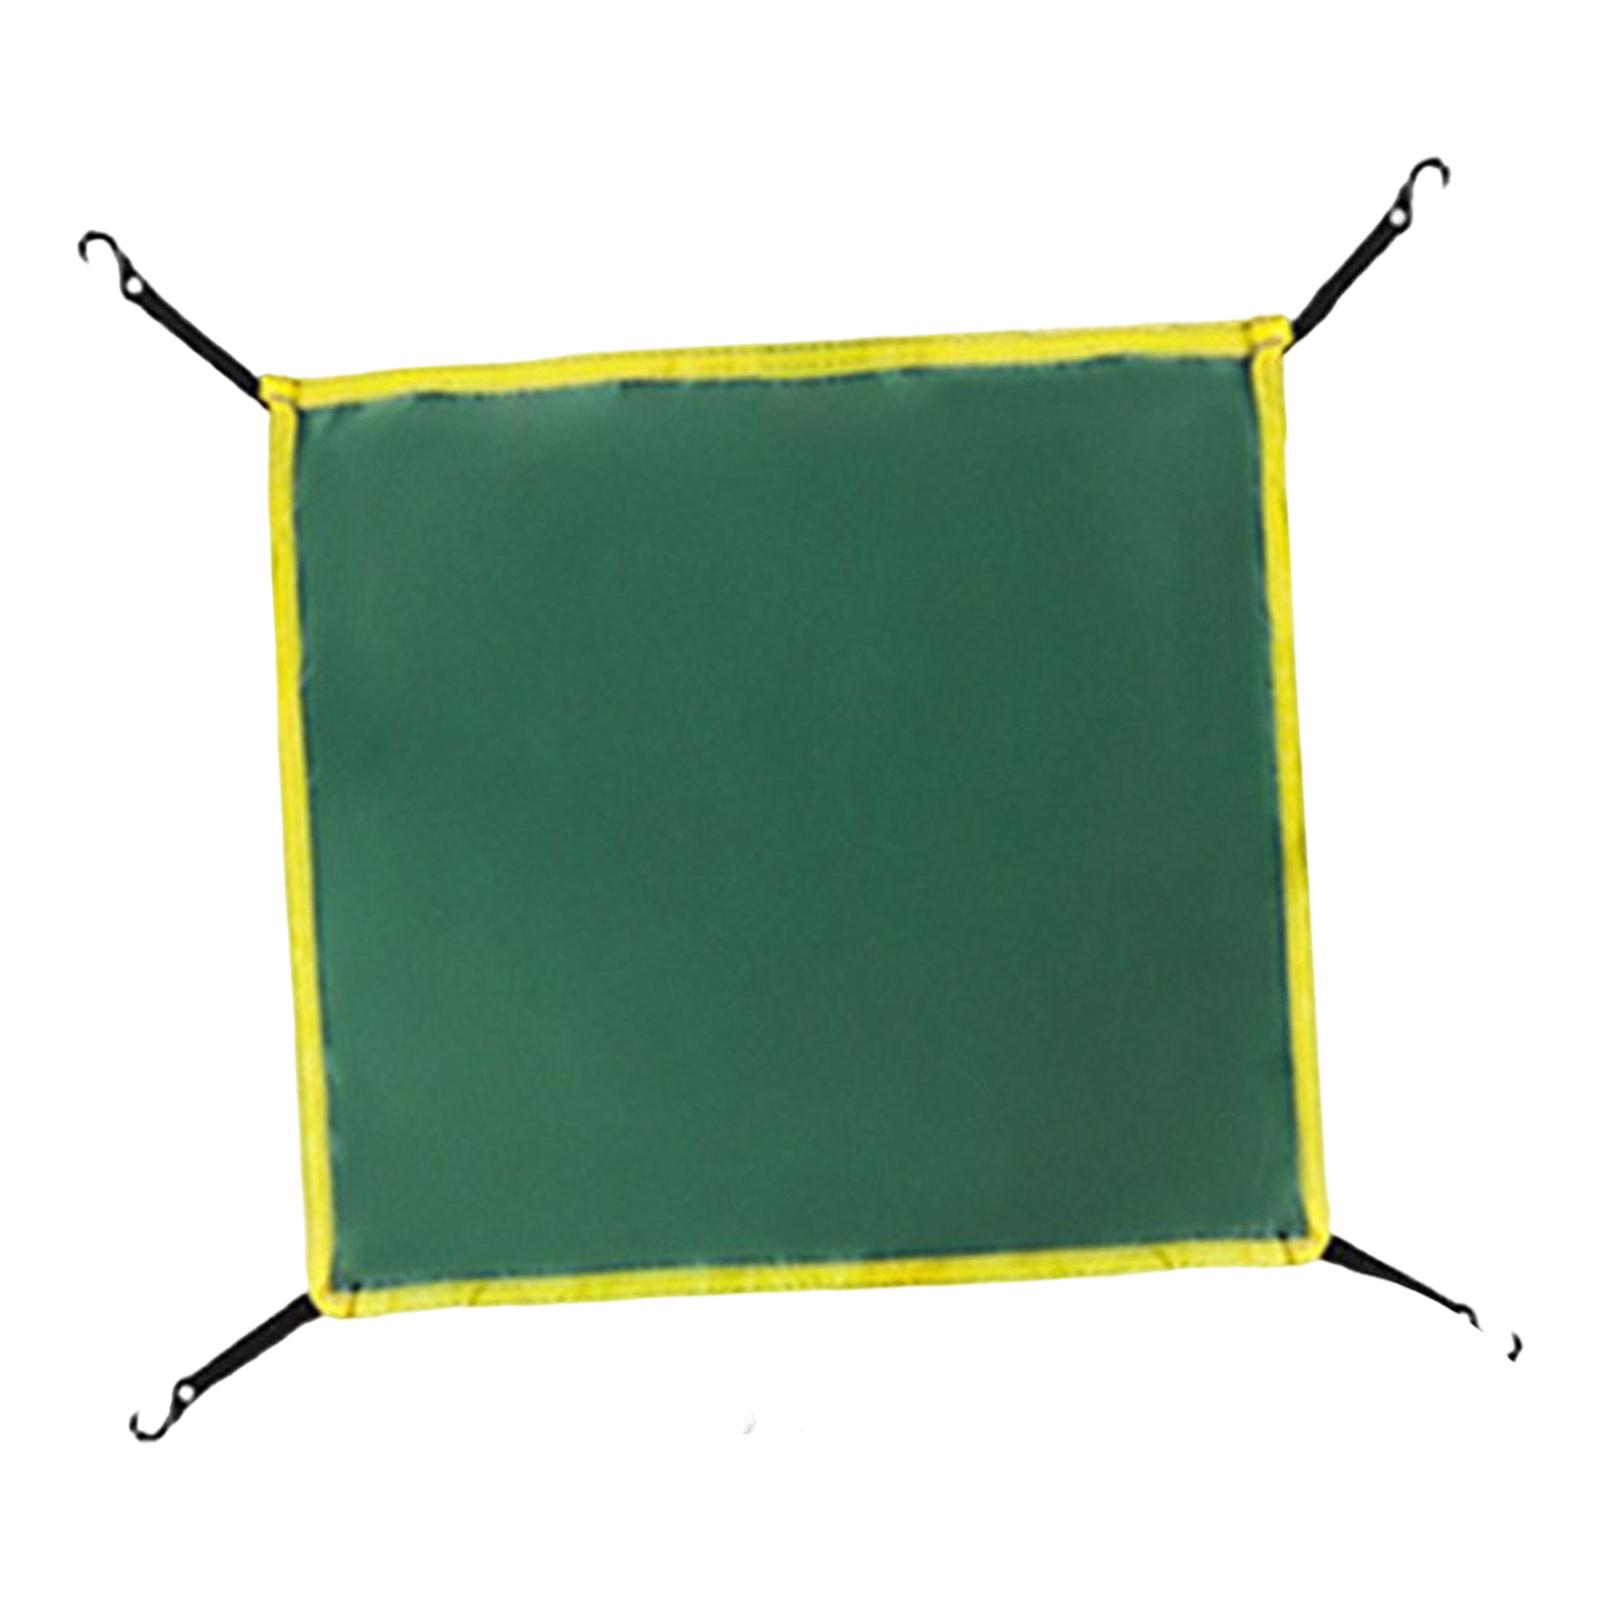 Dome Tent Cover Tarp Replacement Tent Tarp Sunproof Tent Top Cover Tent Shade for Fishing Hiking Travel Outdoor Camping